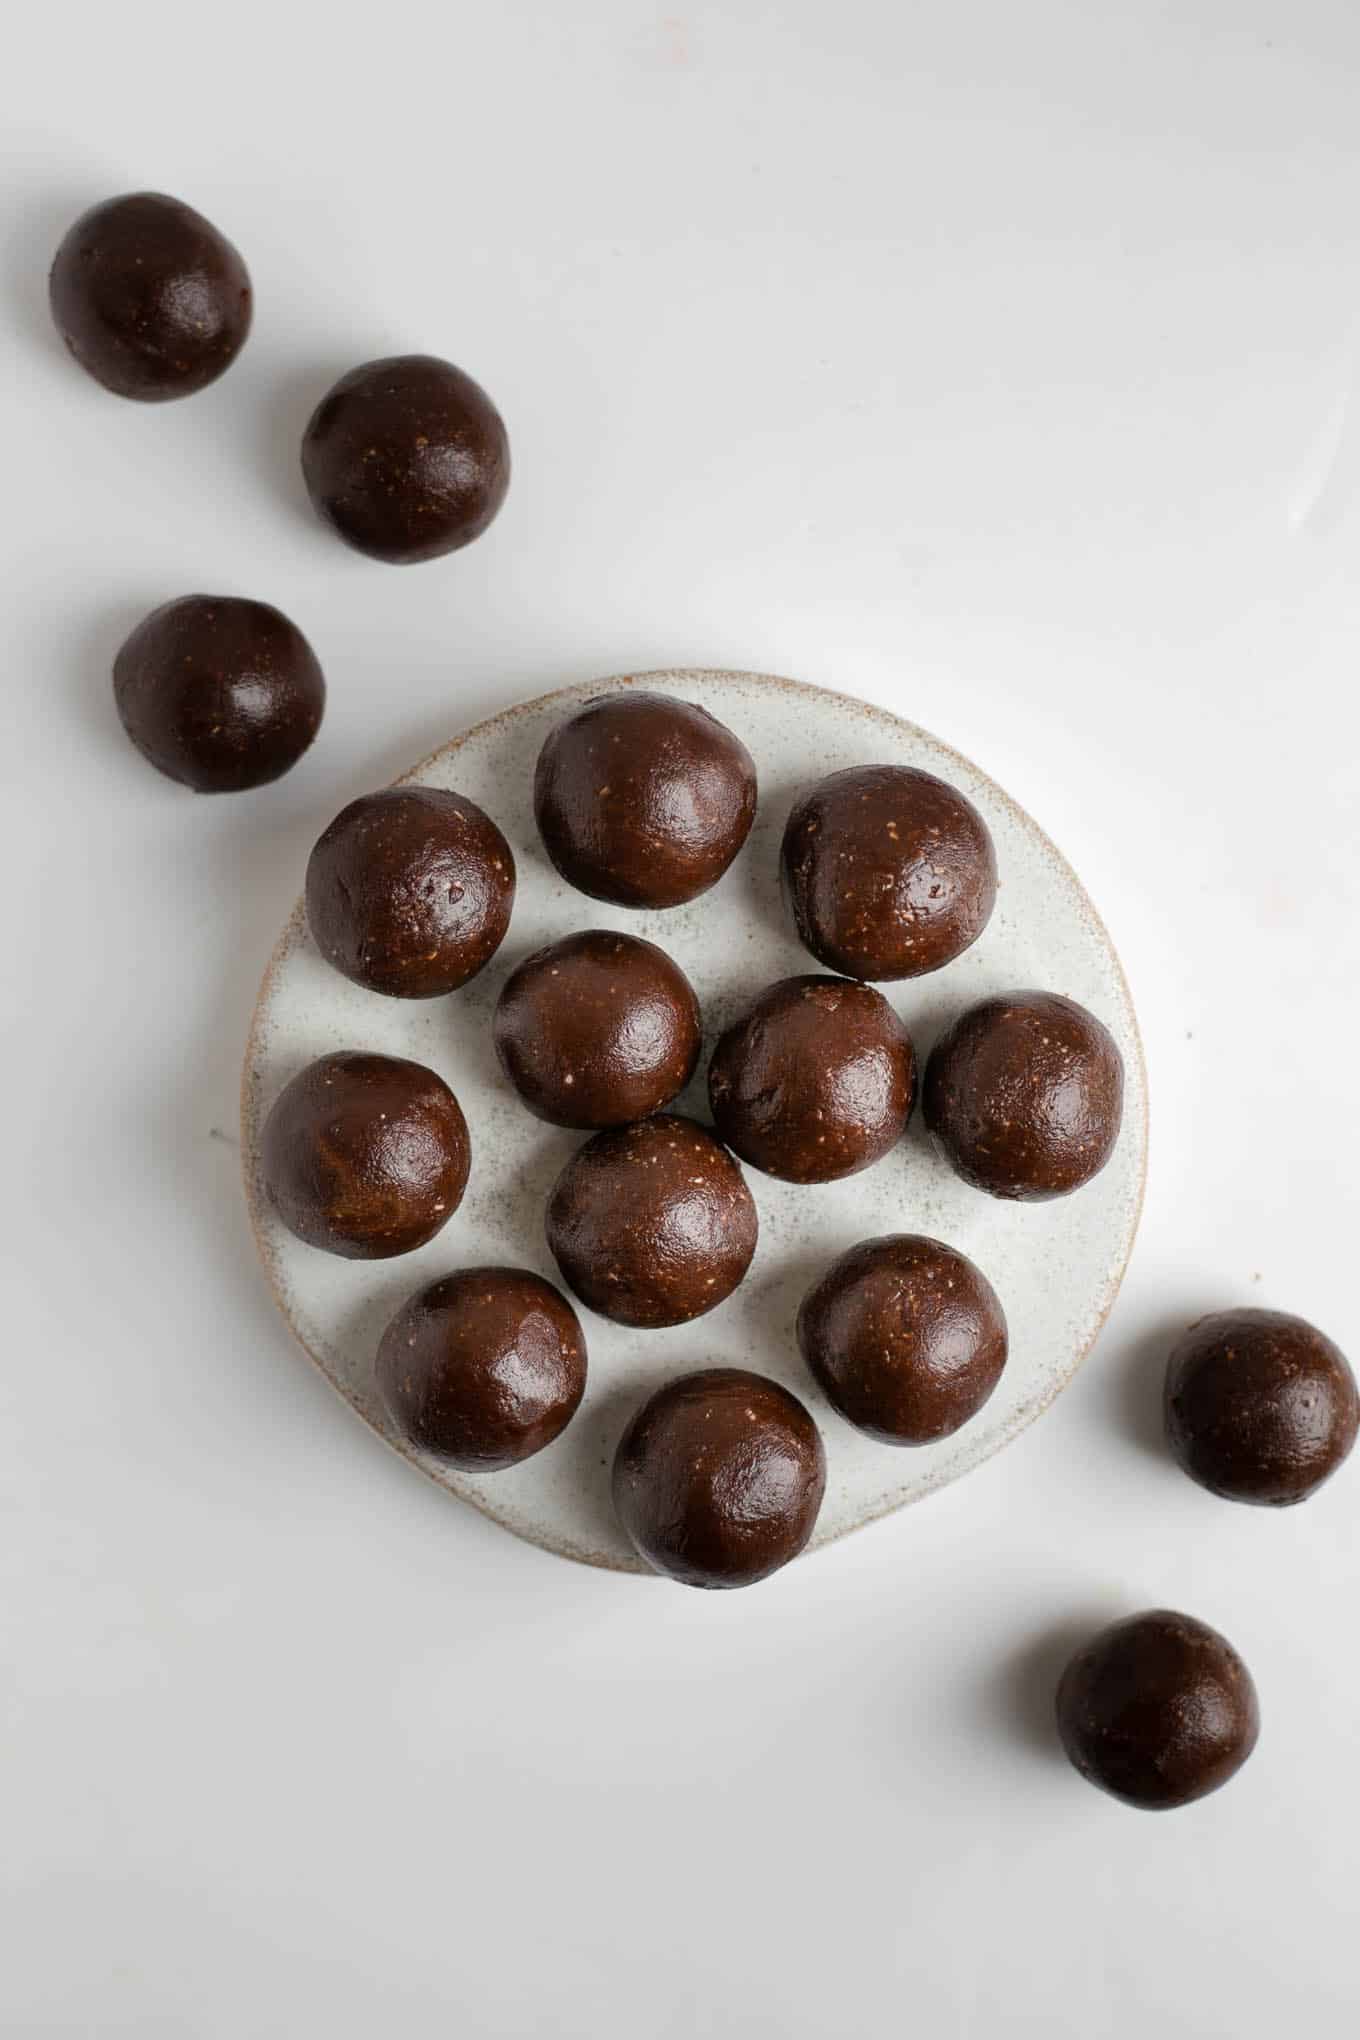 Raw chocolate and peanut butter energy bites! Healthy snack made with only 5 ingredients! #healthyrecipe #rawtreats #energybites | via @annabanana.co